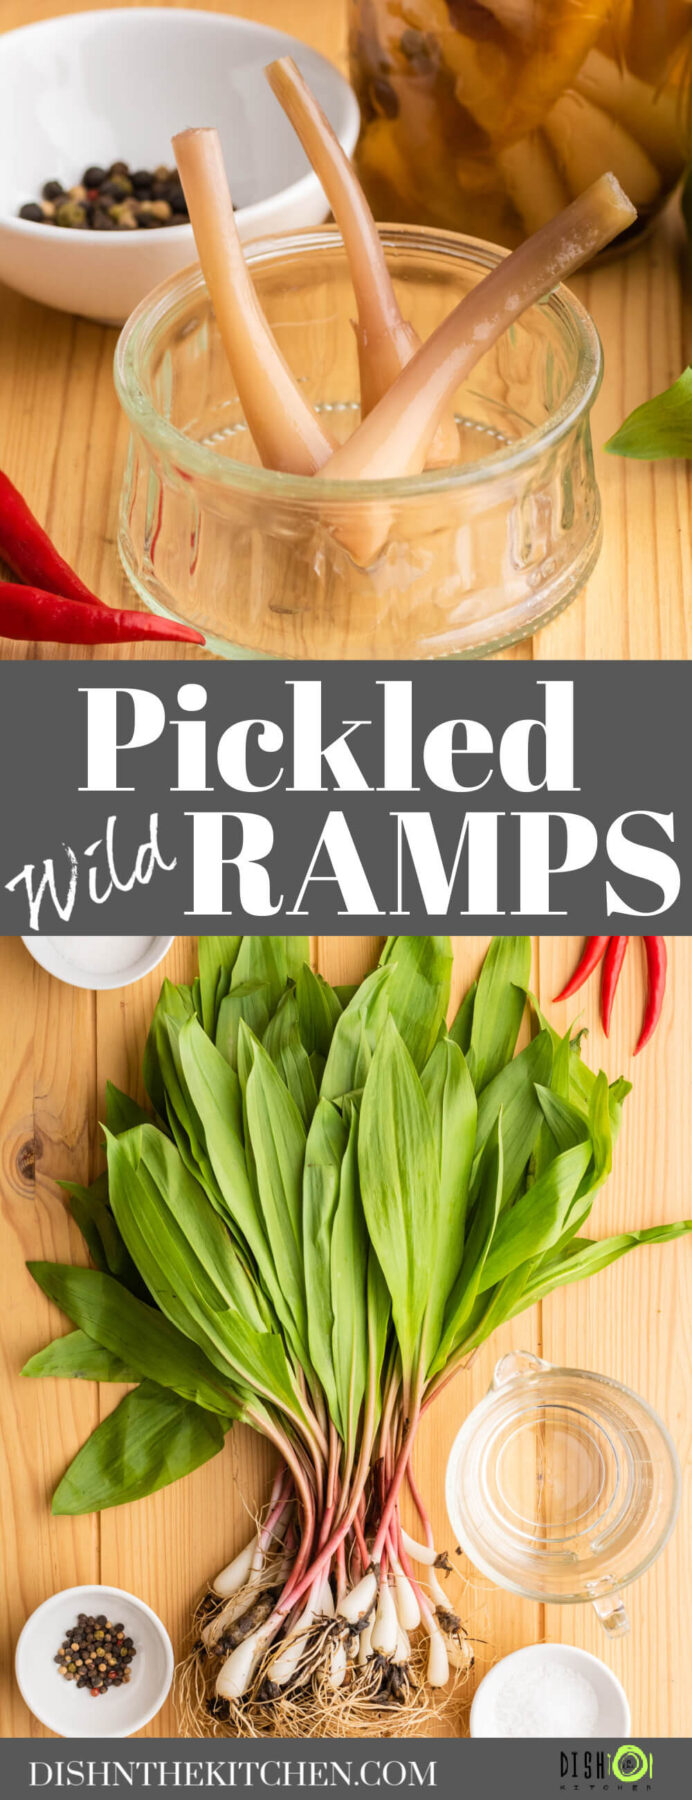 Pinterest image for Pickled ramps showing ingredients and finished pickles.